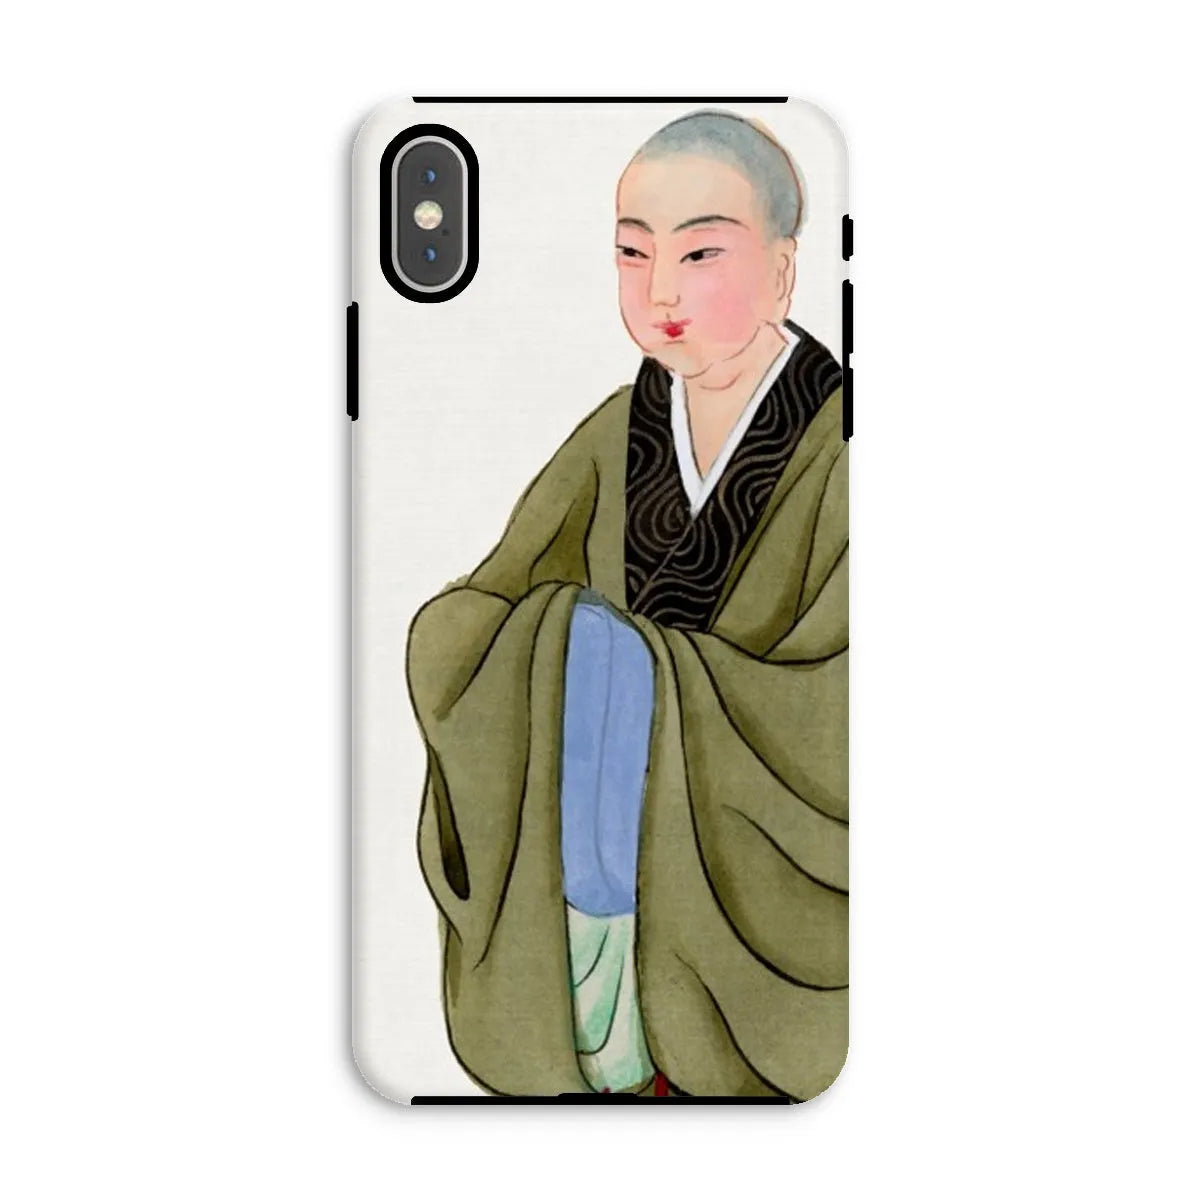 Buddhist Monk - Manchu Chinese Aesthetic Art Phone Case - Iphone Xs Max / Matte - Mobile Phone Cases - Aesthetic Art